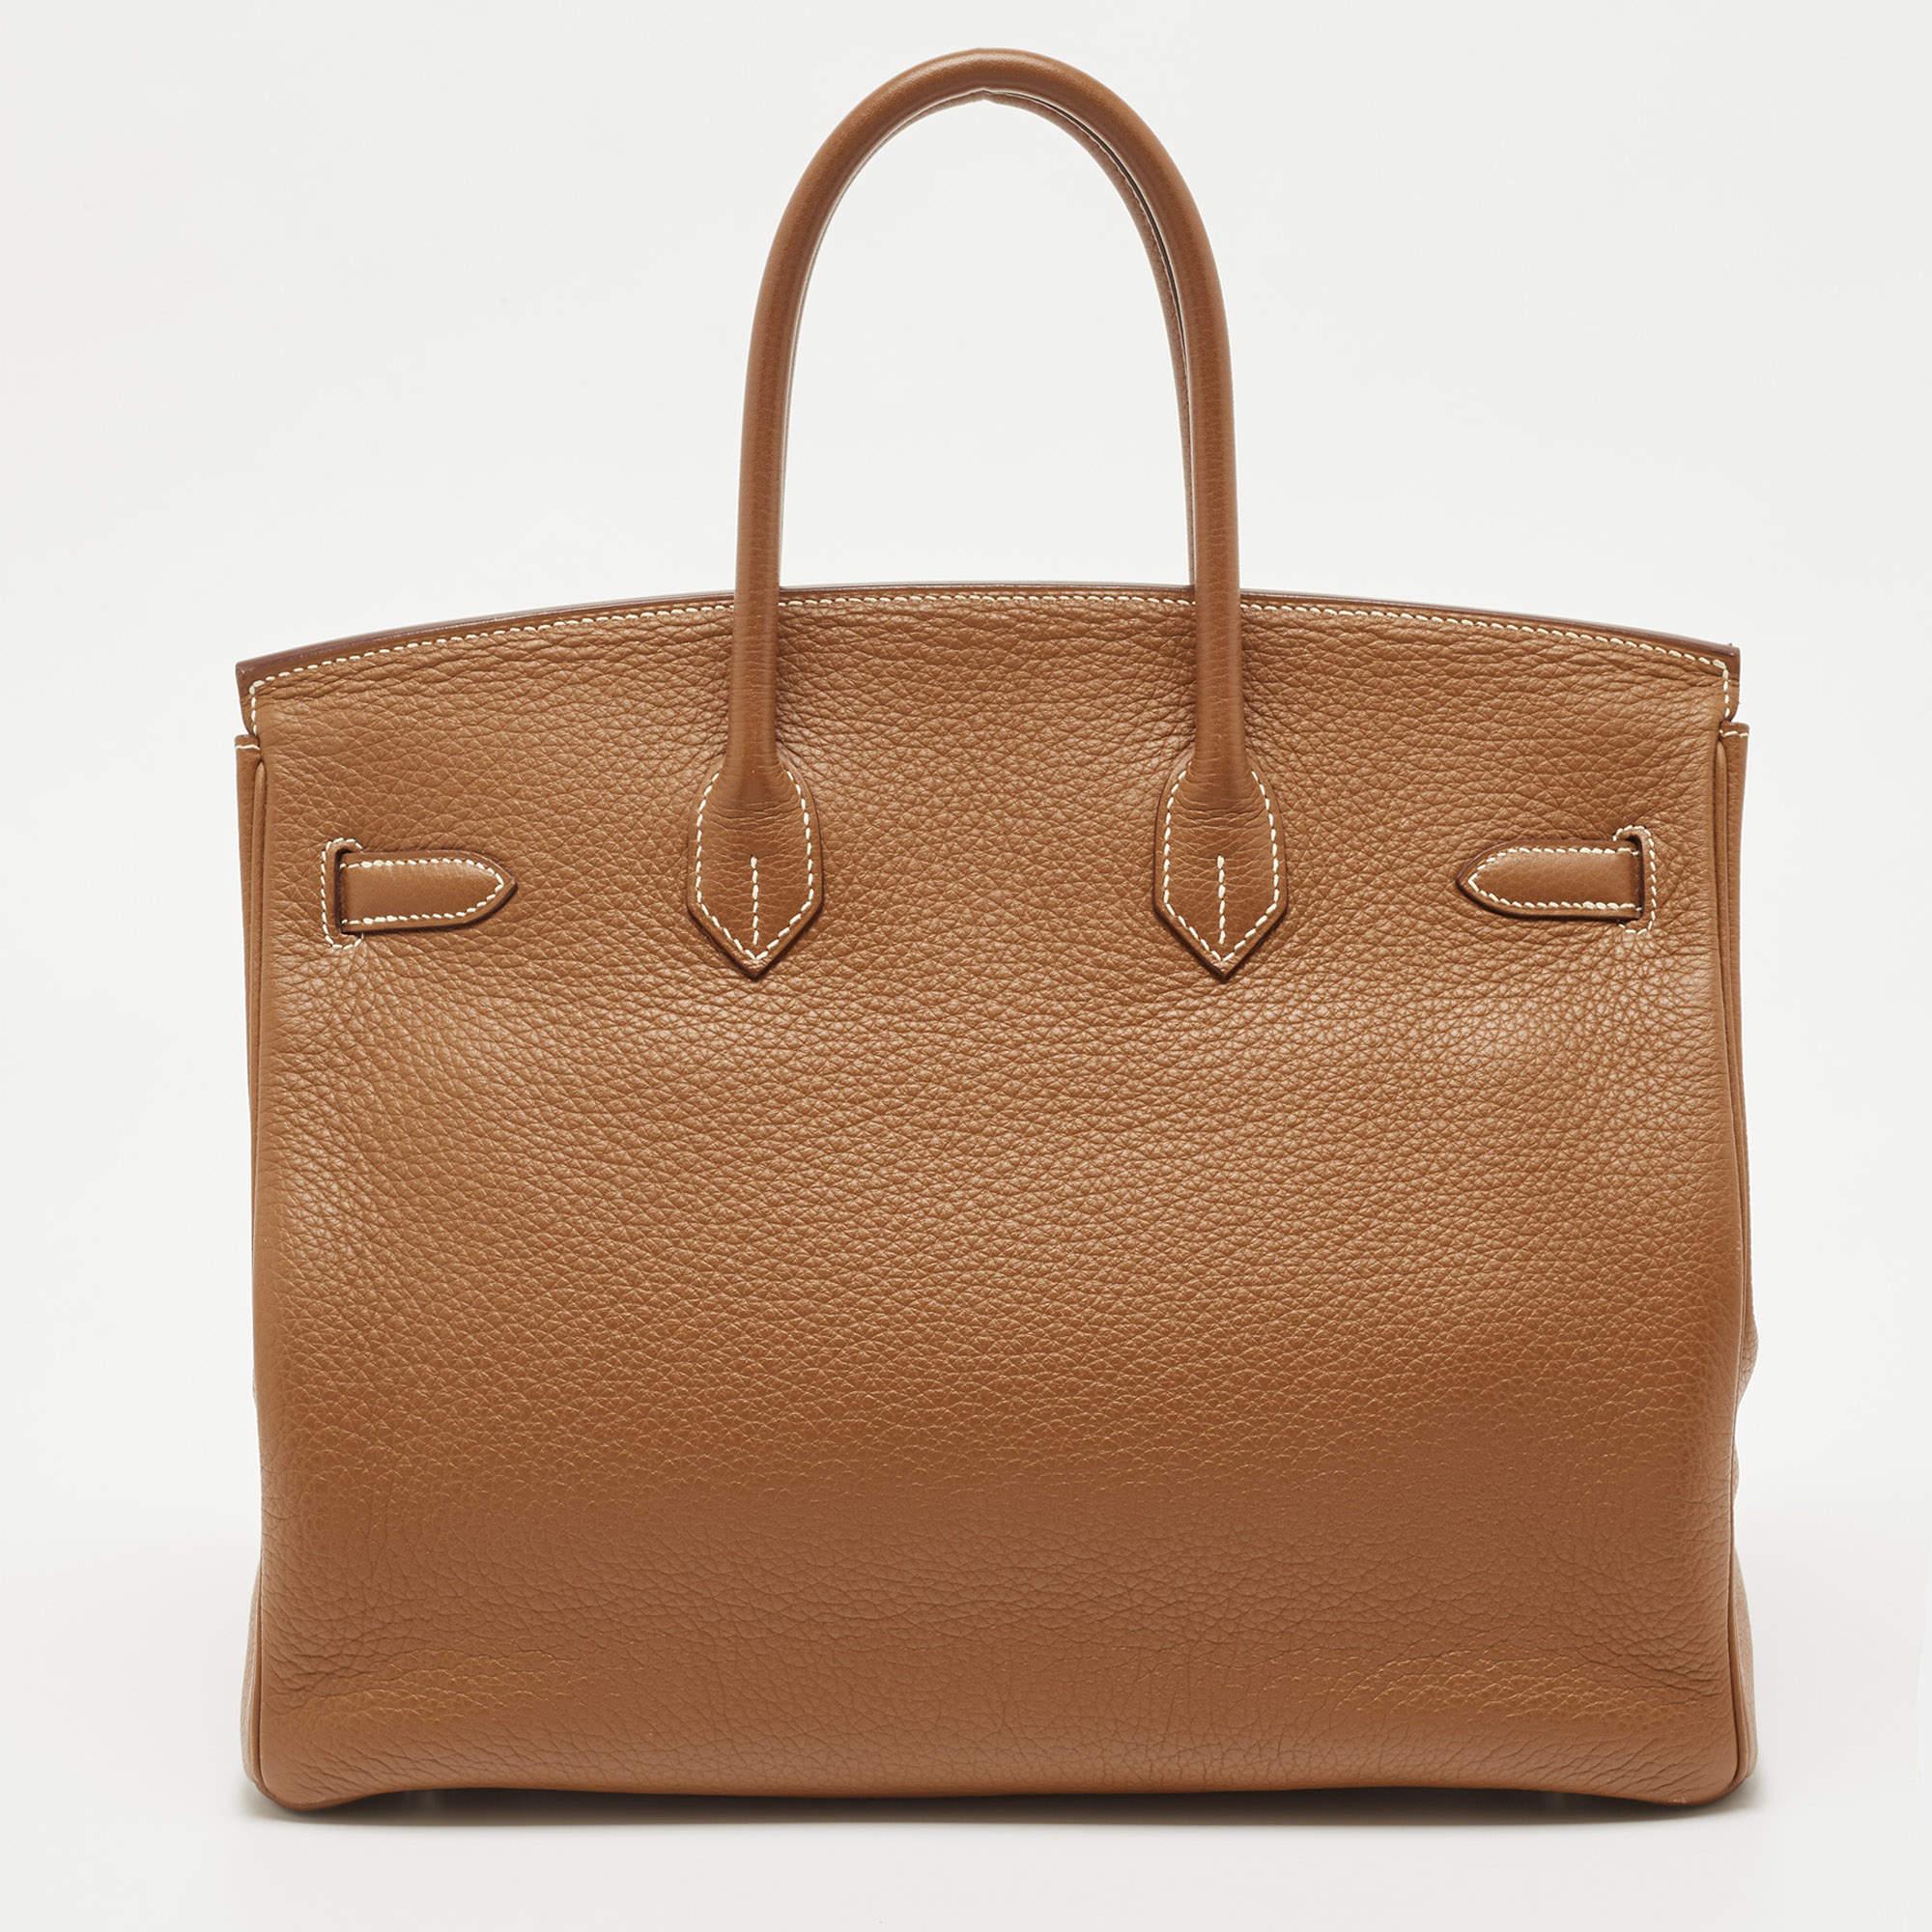 Handcrafted from the highest quality leather by skilled artisans, it takes long hours of rigorous effort to stitch a Birkin together. Crafted in France from Taurillion Clemence leather, this Birkin 35 features dual top rolled handles and